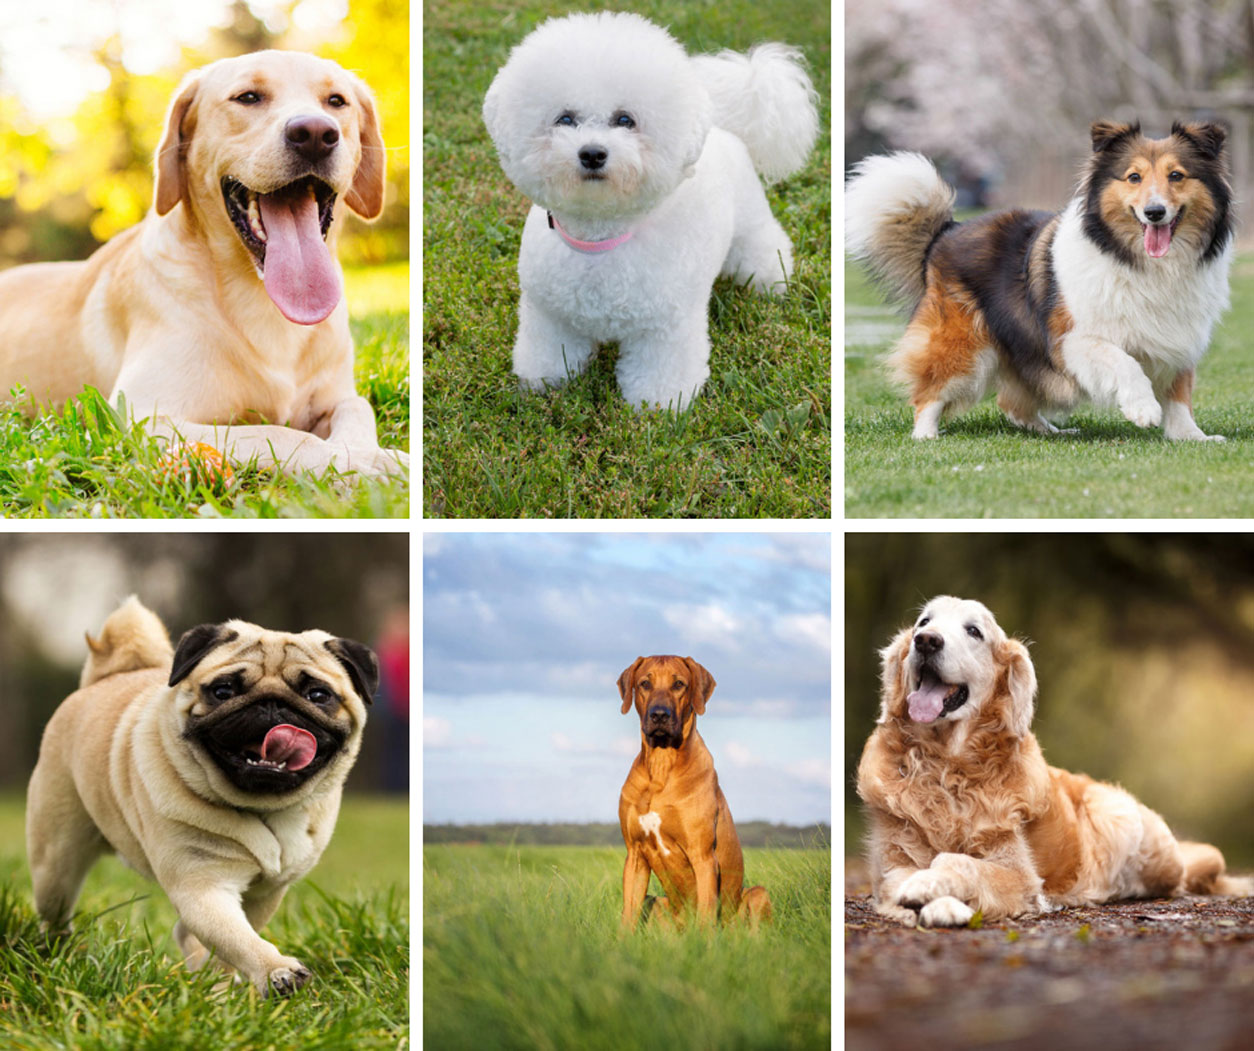 What Kind of Dog Should We Get? The Best Dogs for Kids! - FamilyEducation